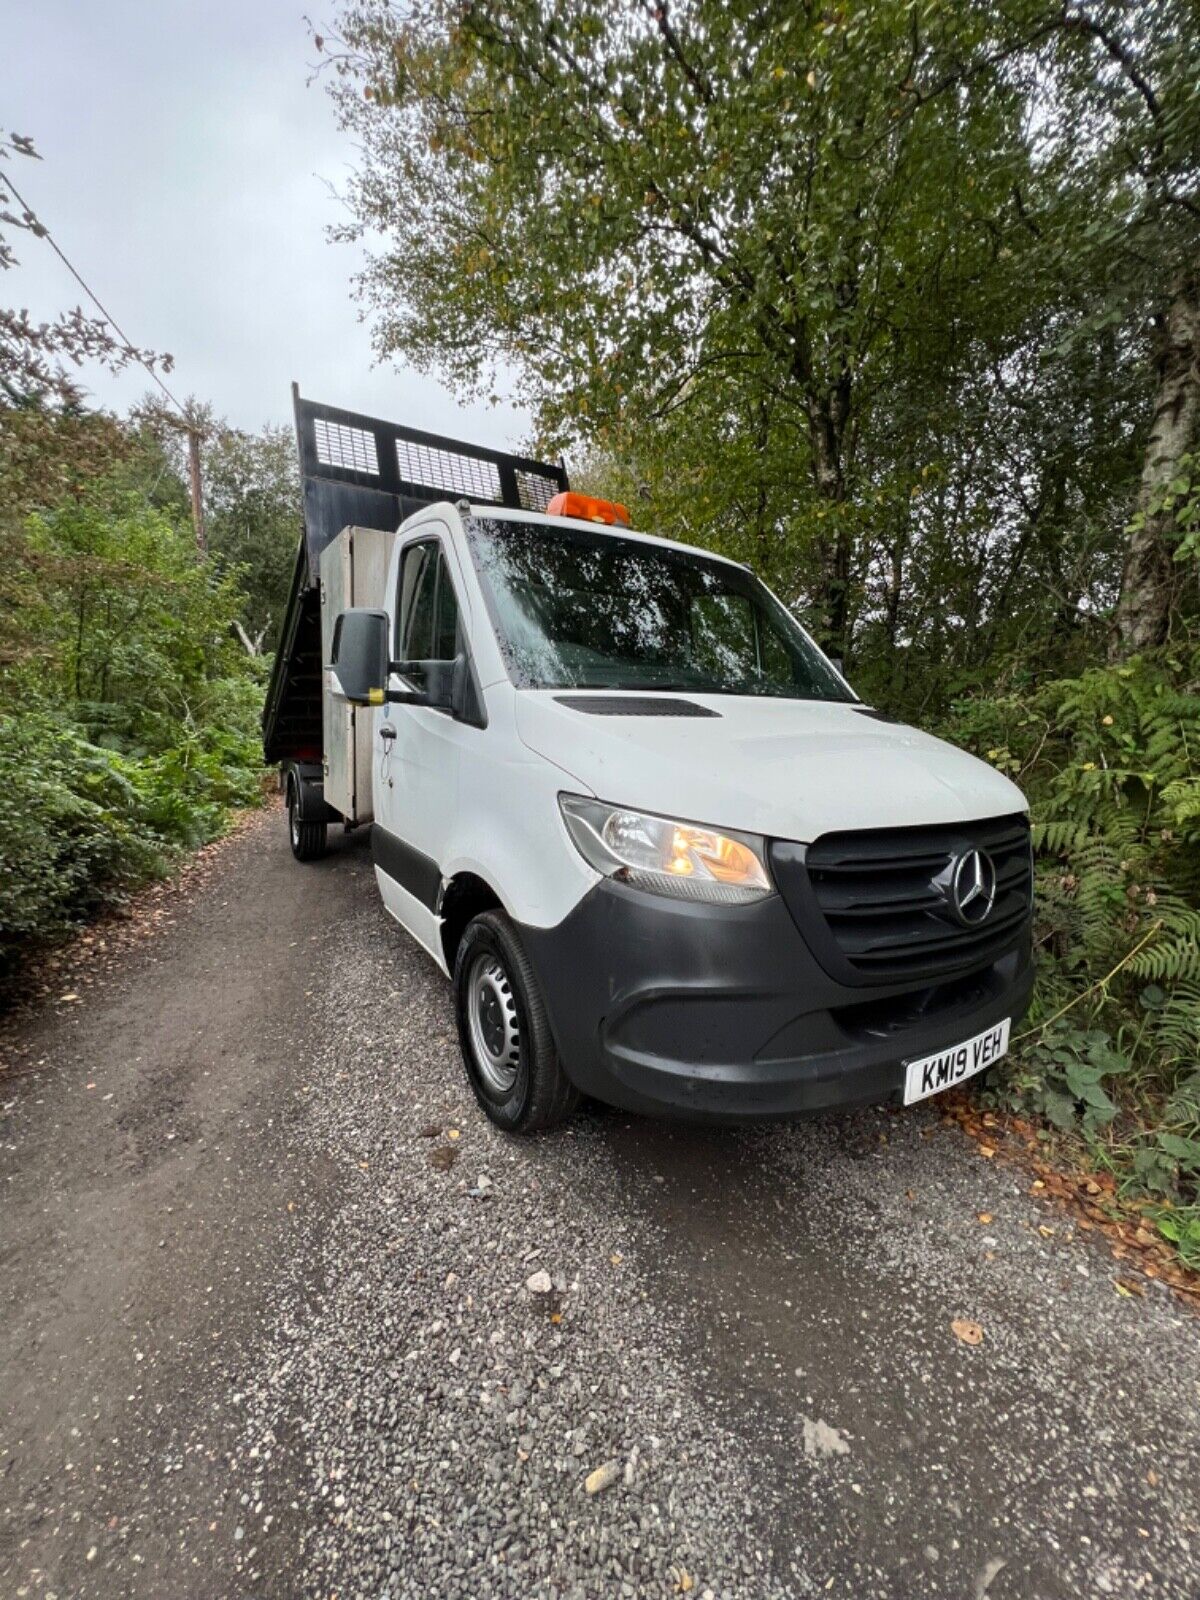 Bid on 2019 MERCEDES SPRINTER TIPPER SINGEL CAB V5- Buy &amp; Sell on Auction with EAMA Group